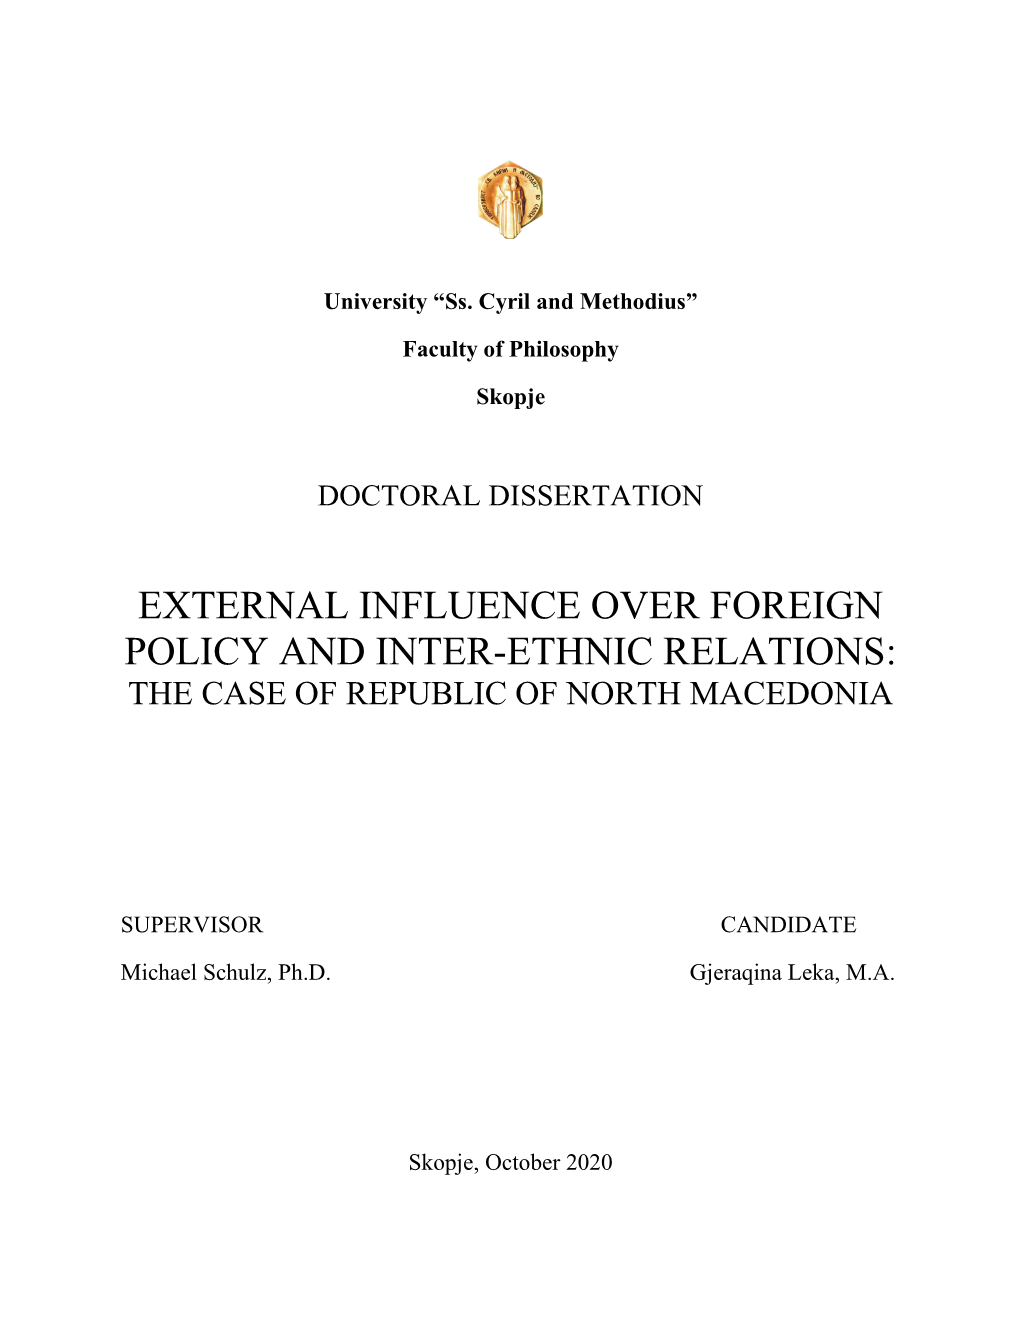 External Influence Over Foreign Policy and Inter-Ethnic Relations: the Case of Republic of North Macedonia